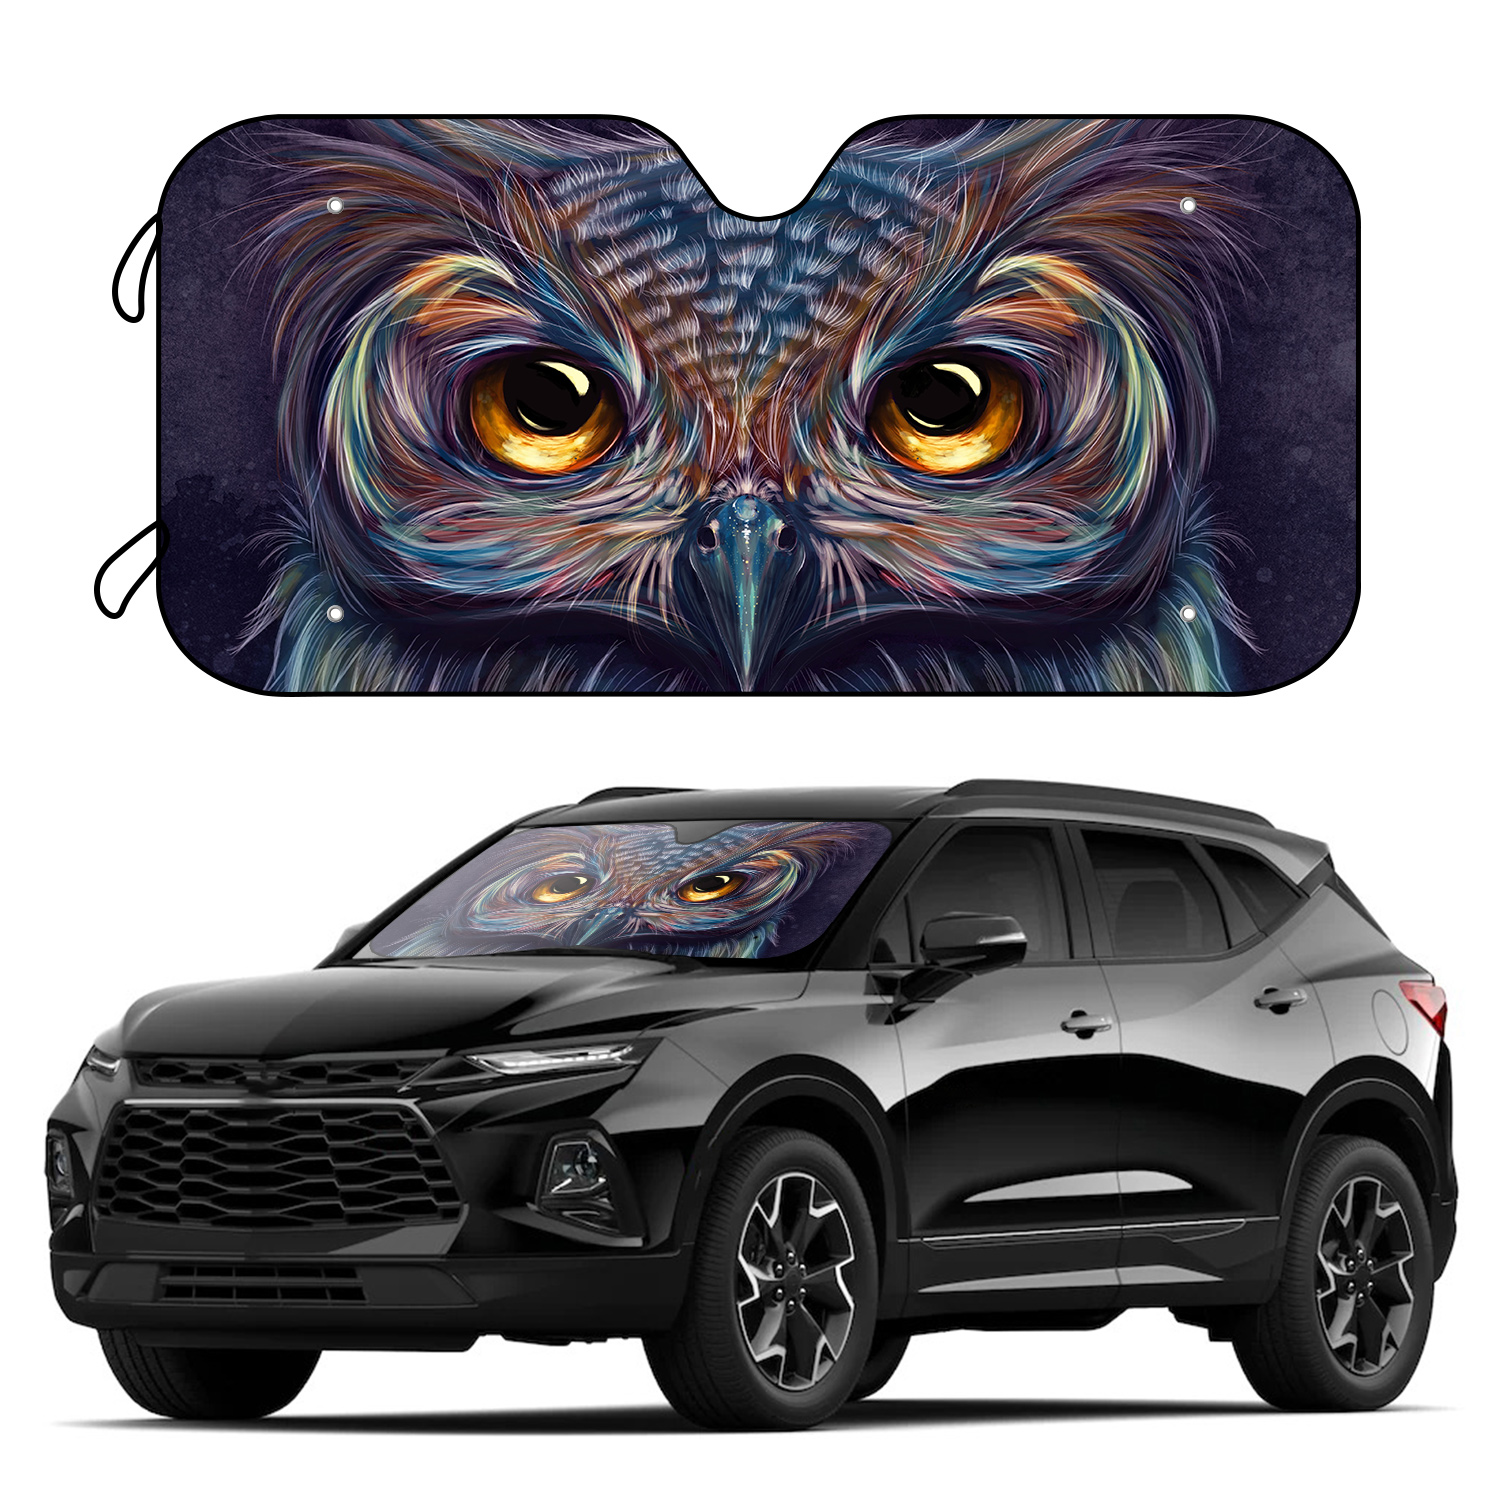 

1pc Owl Eyes Car Sun Shade For Front Windshield Sunshades With 4 Free Suction Cups Foldable Protector Blocks Uv Rays Sun Visor Keep Your Vehicle Cool